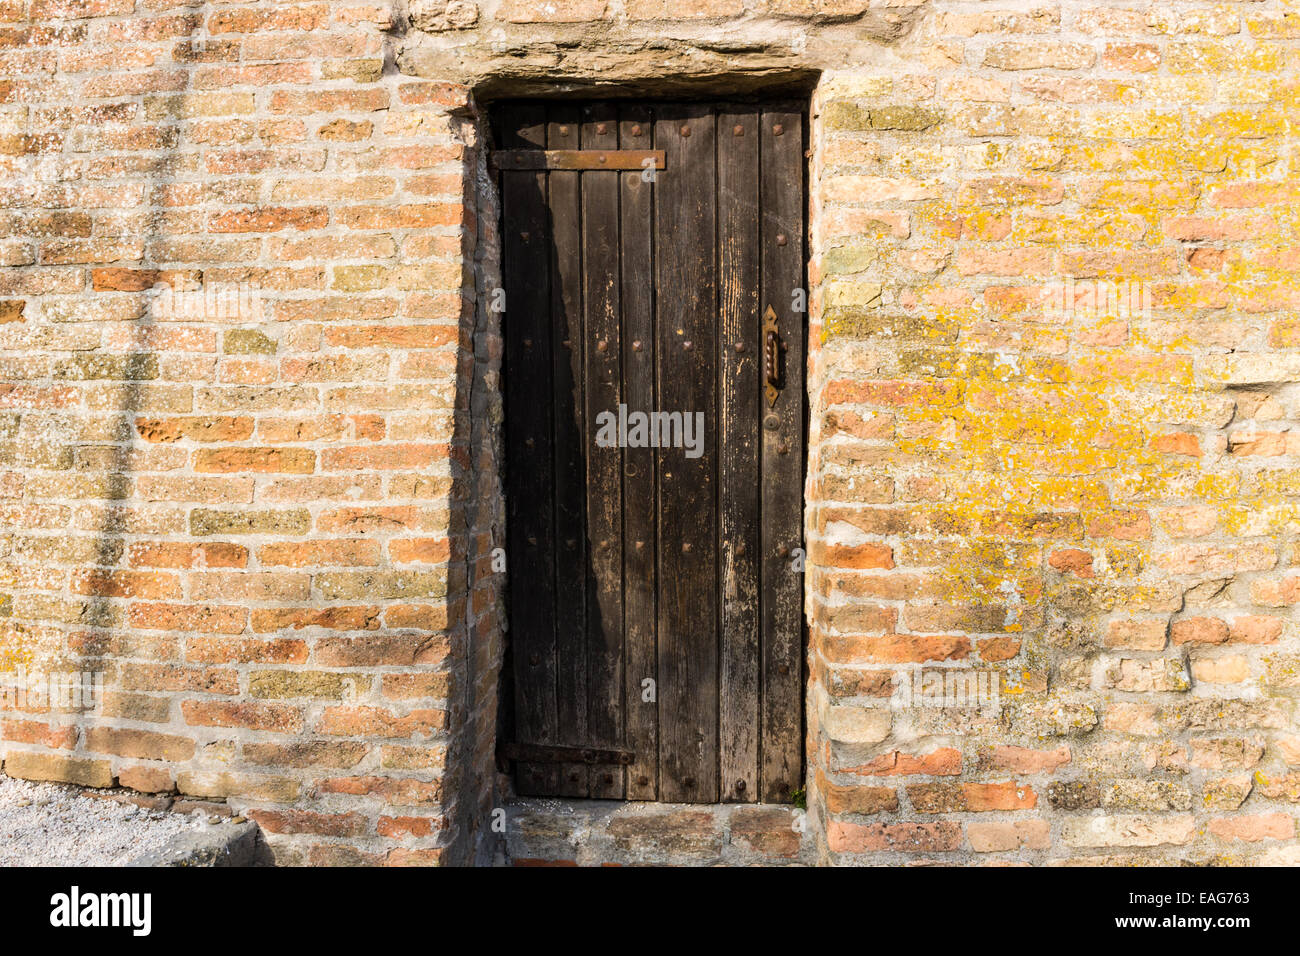 Door in the brick walls of the medieval Fortress of Venetians in Brisighella Stock Photo